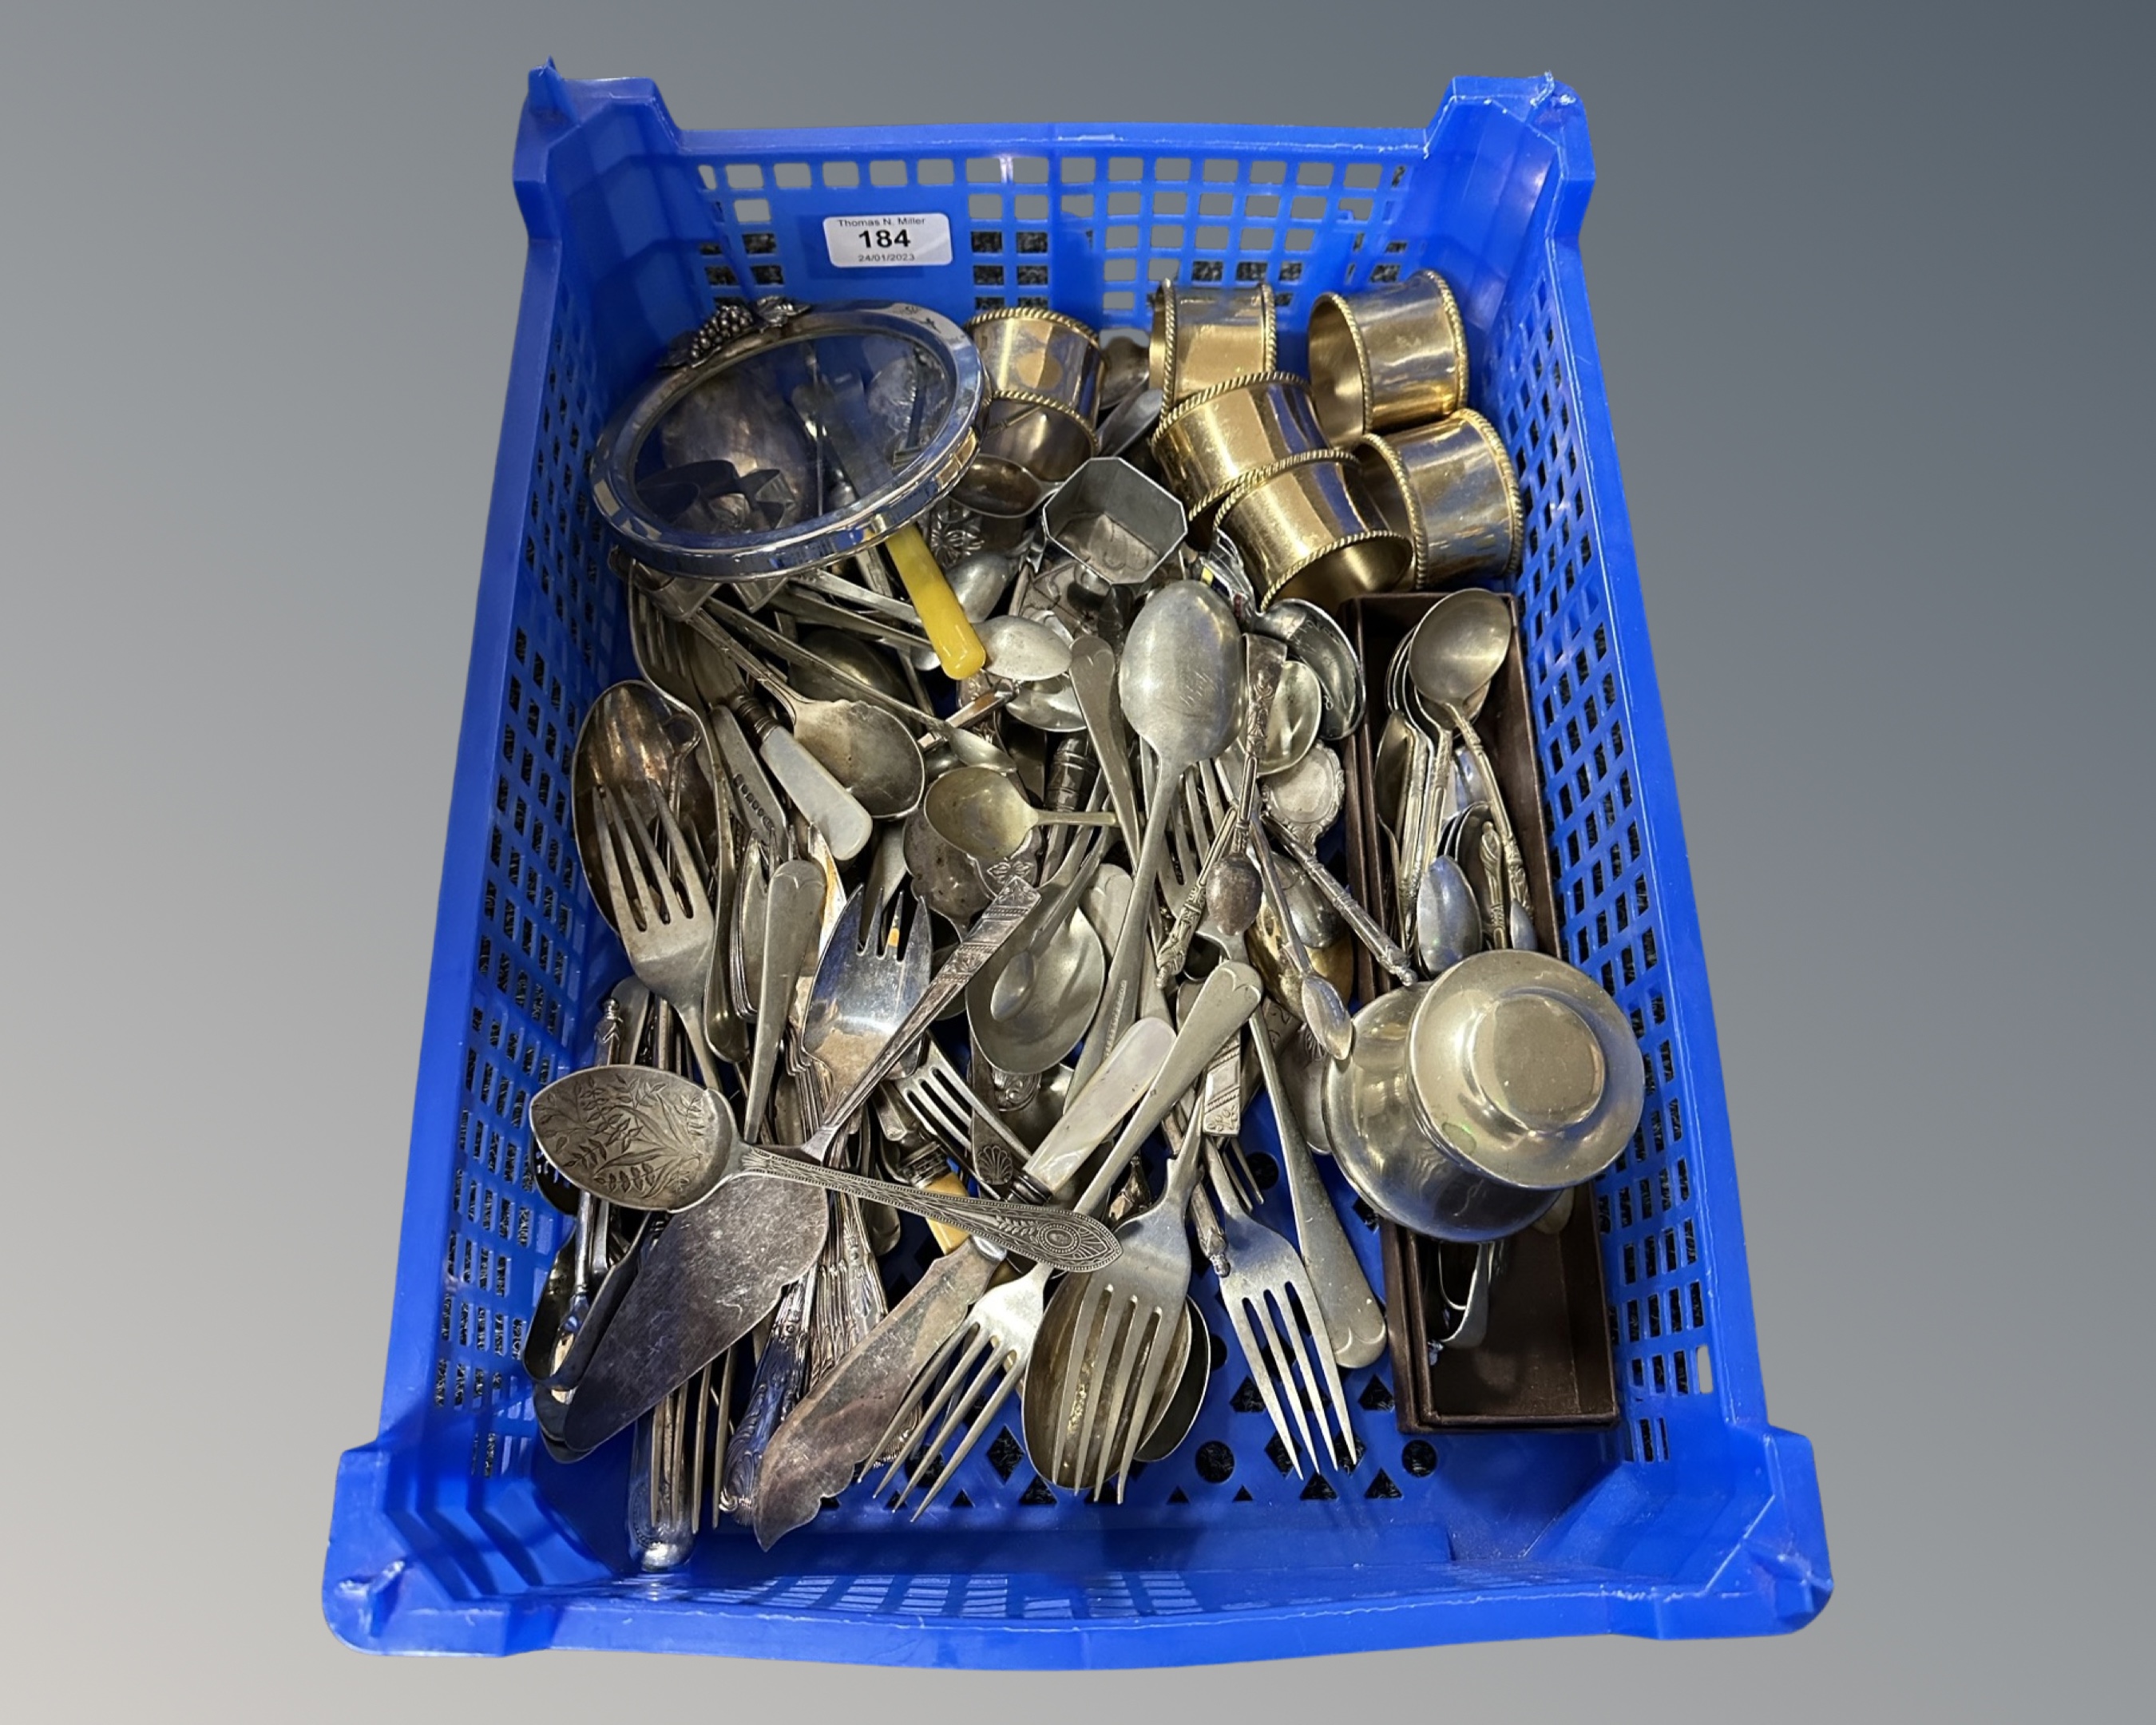 A crate containing assorted loose stainless steel and EPNS cutlery, napkin rings etc.